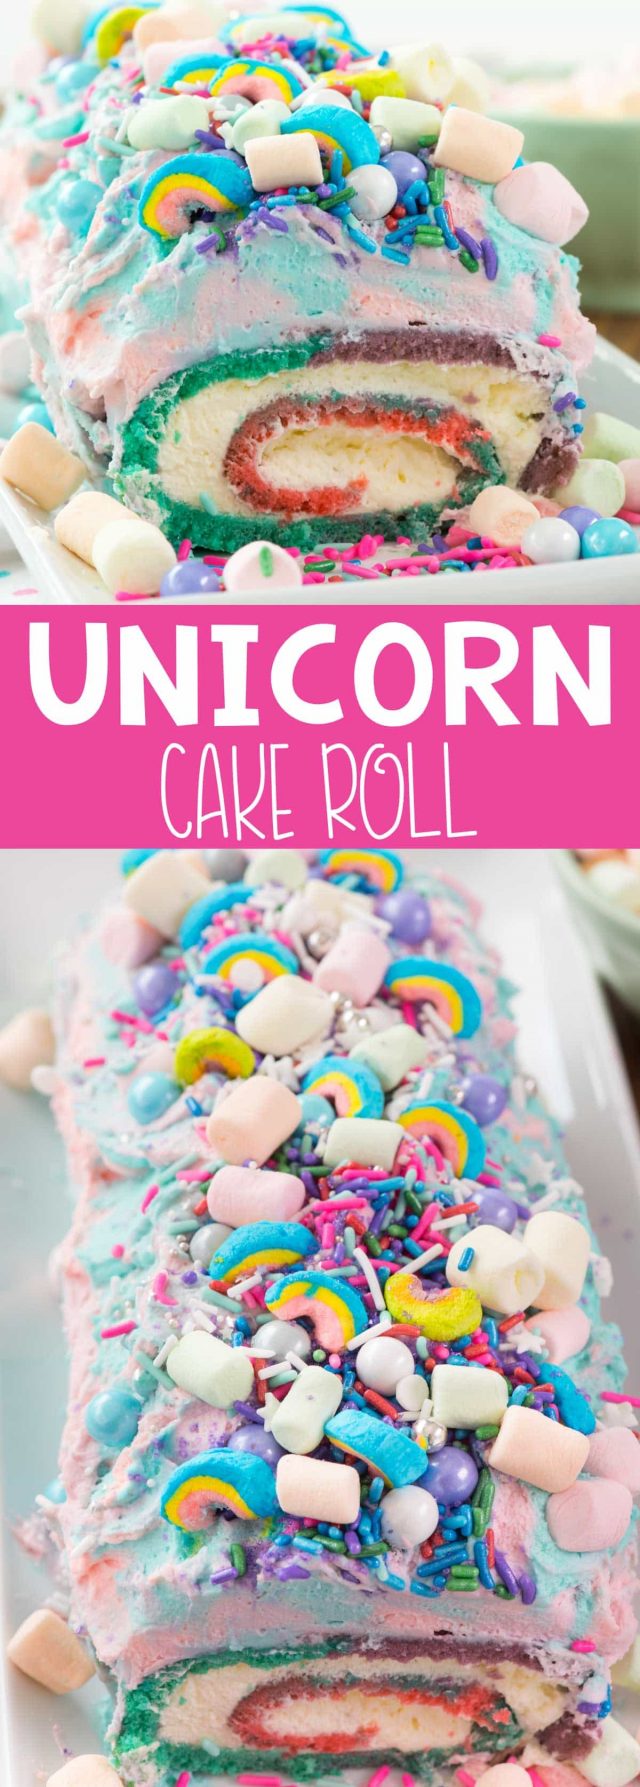 photo collage - Unicorn Cake Roll with frosting, pudding whipped cream, sprinkles, marshmallows on a white platter.